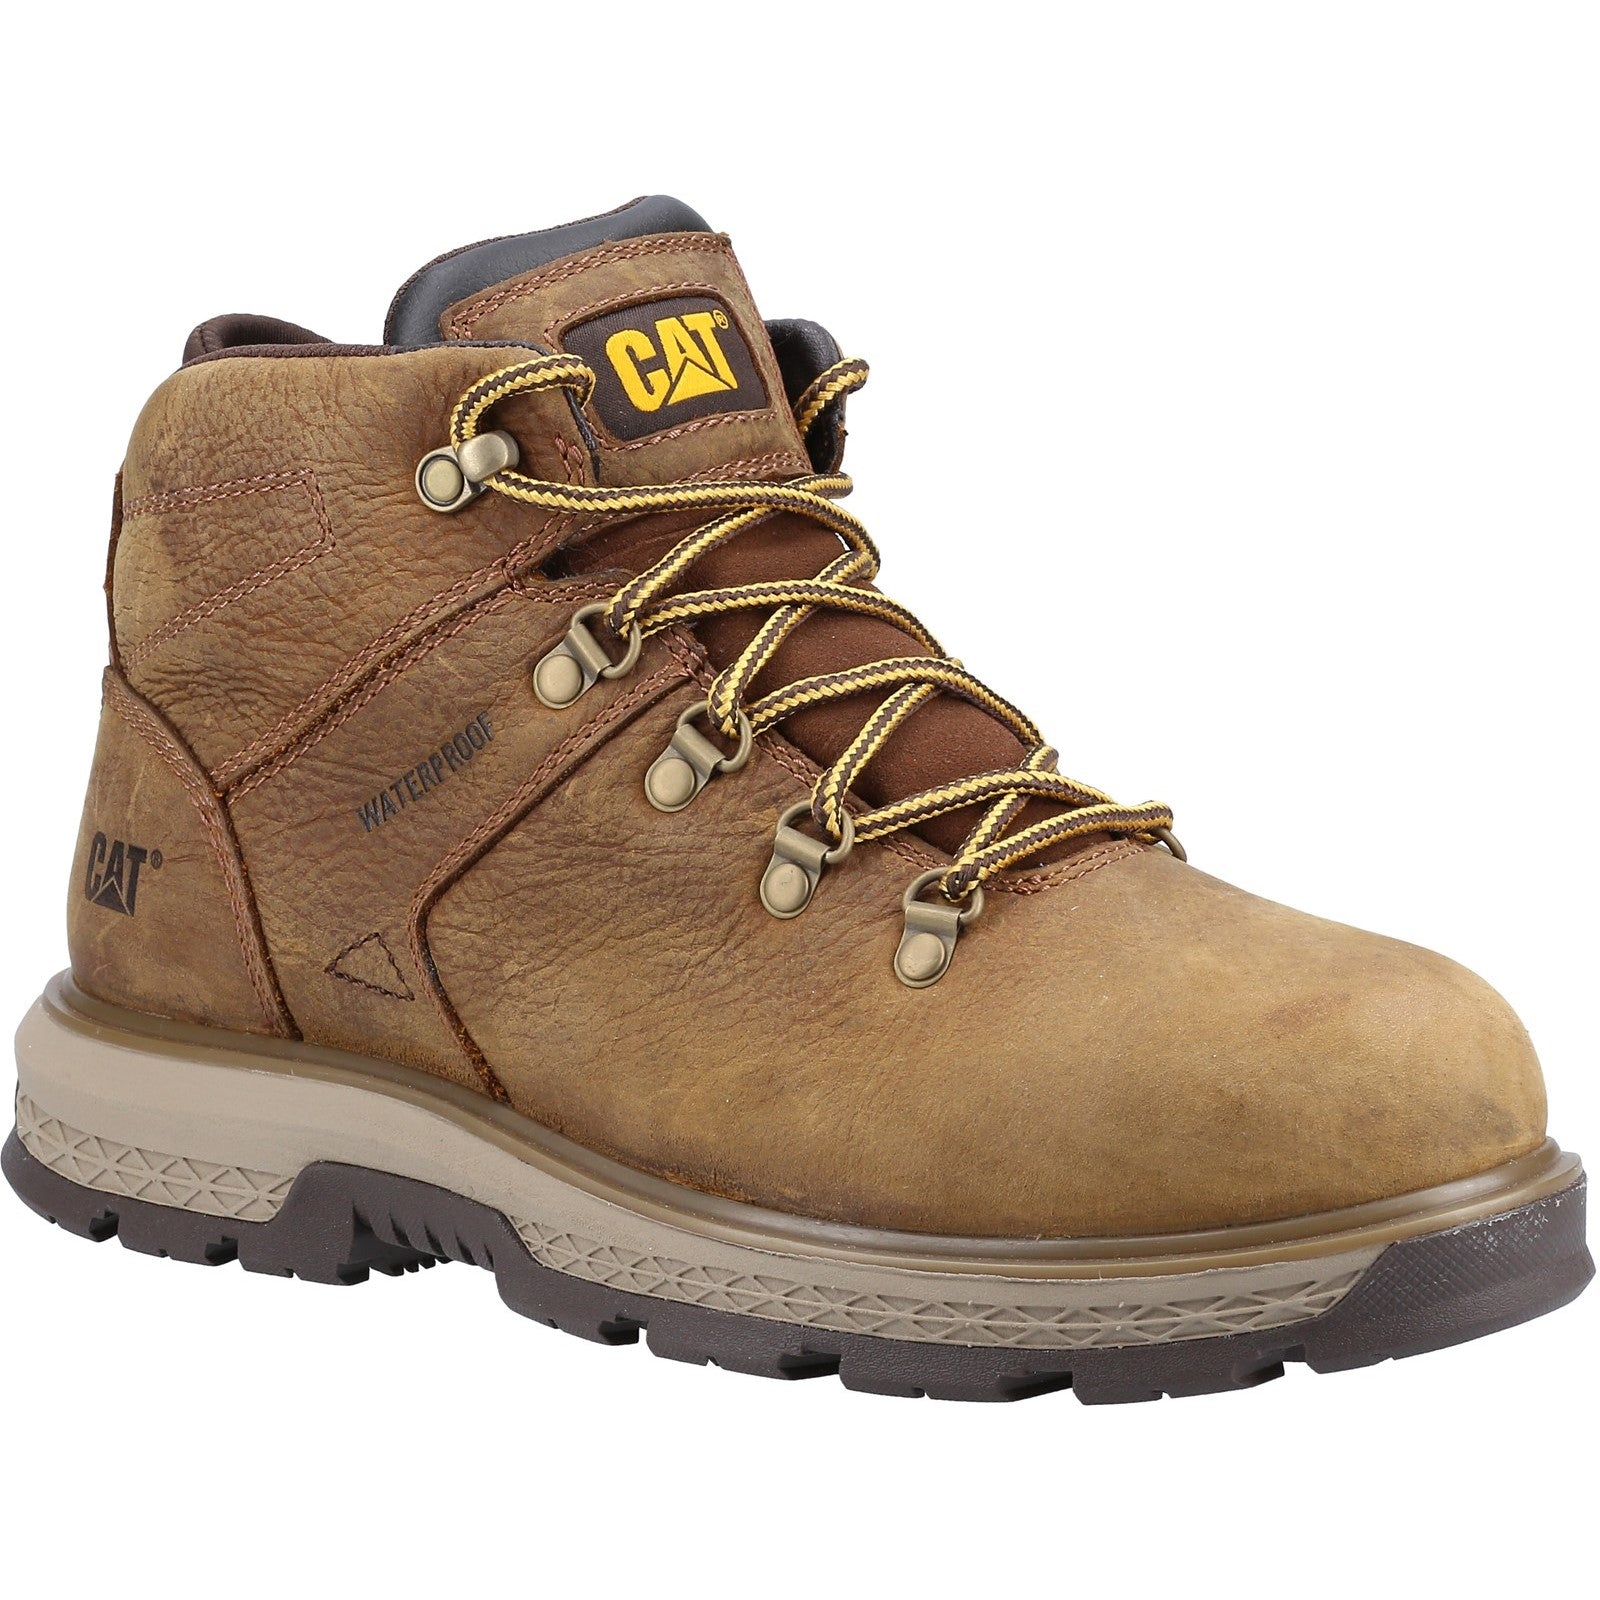 CAT Exposition Hiker Safety Boot